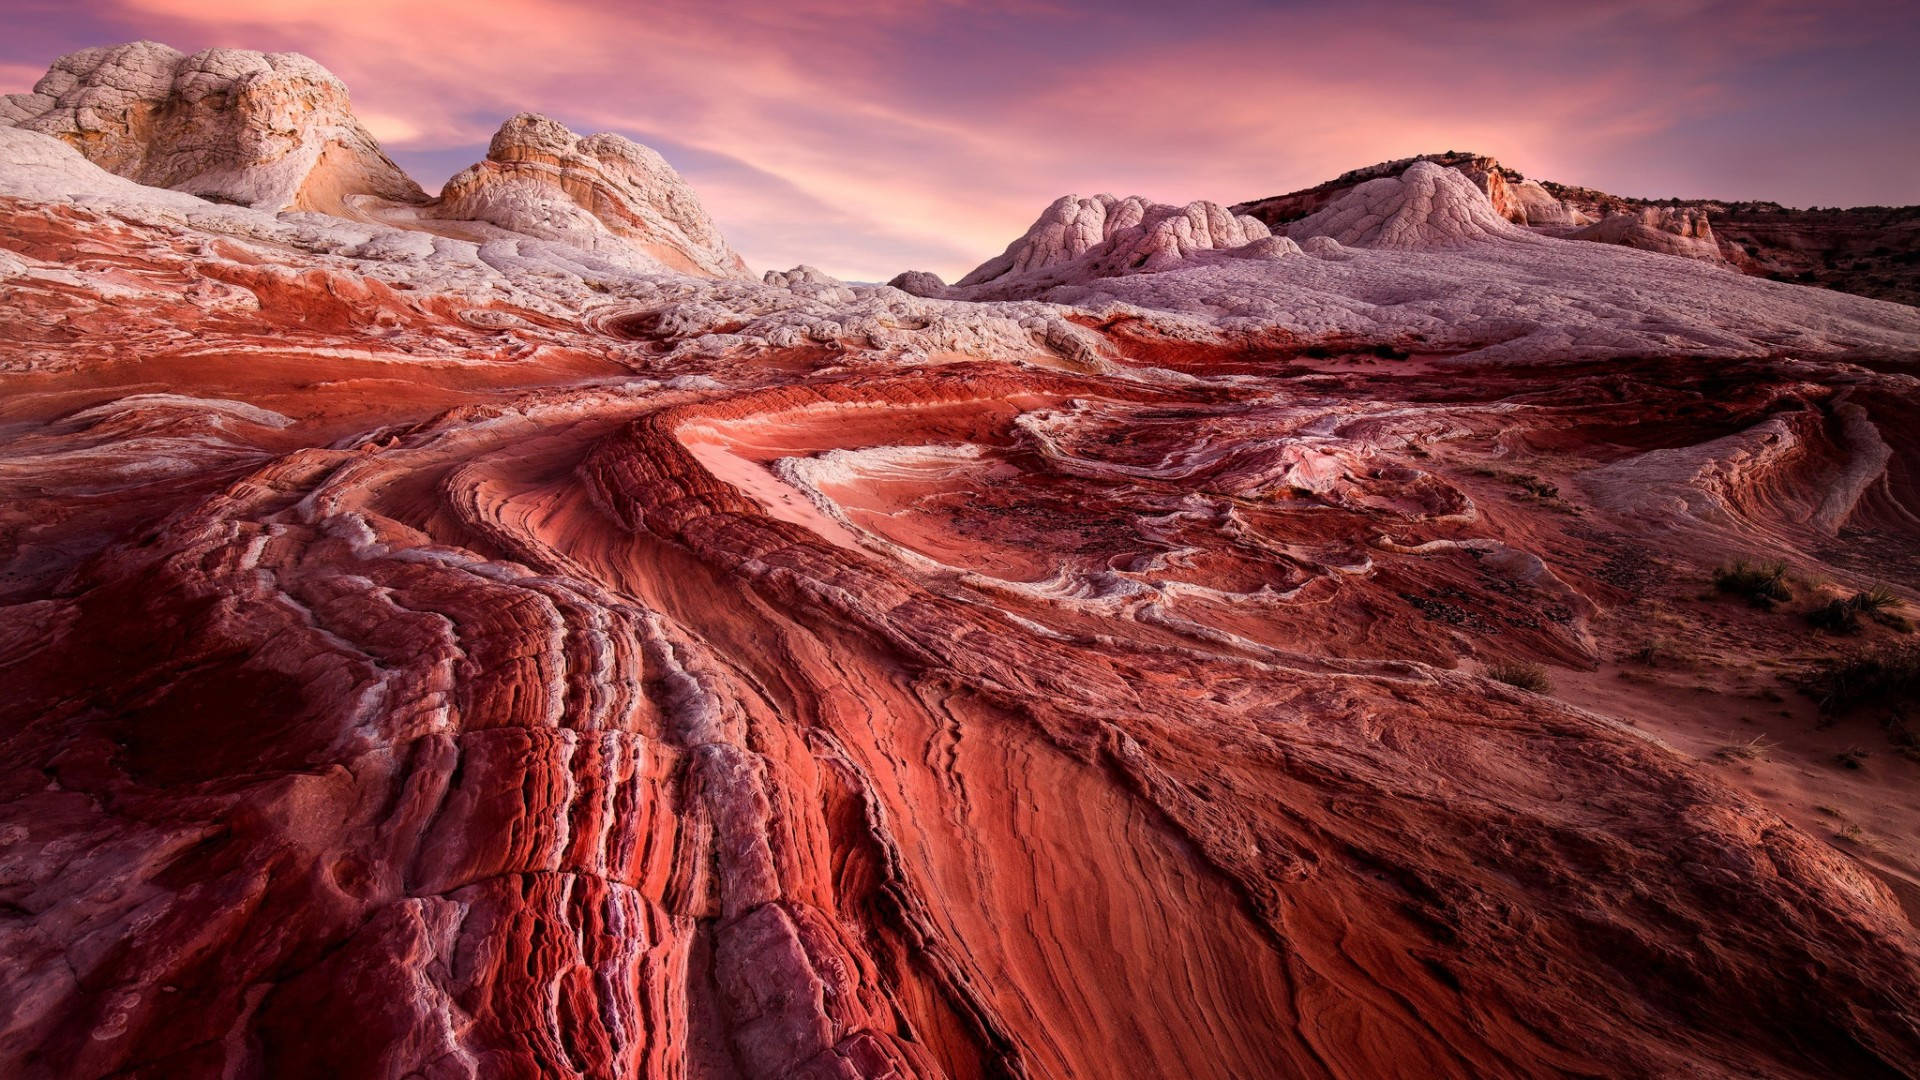 Majestic Red Rock Formations In The Heart Of Arizona Desert